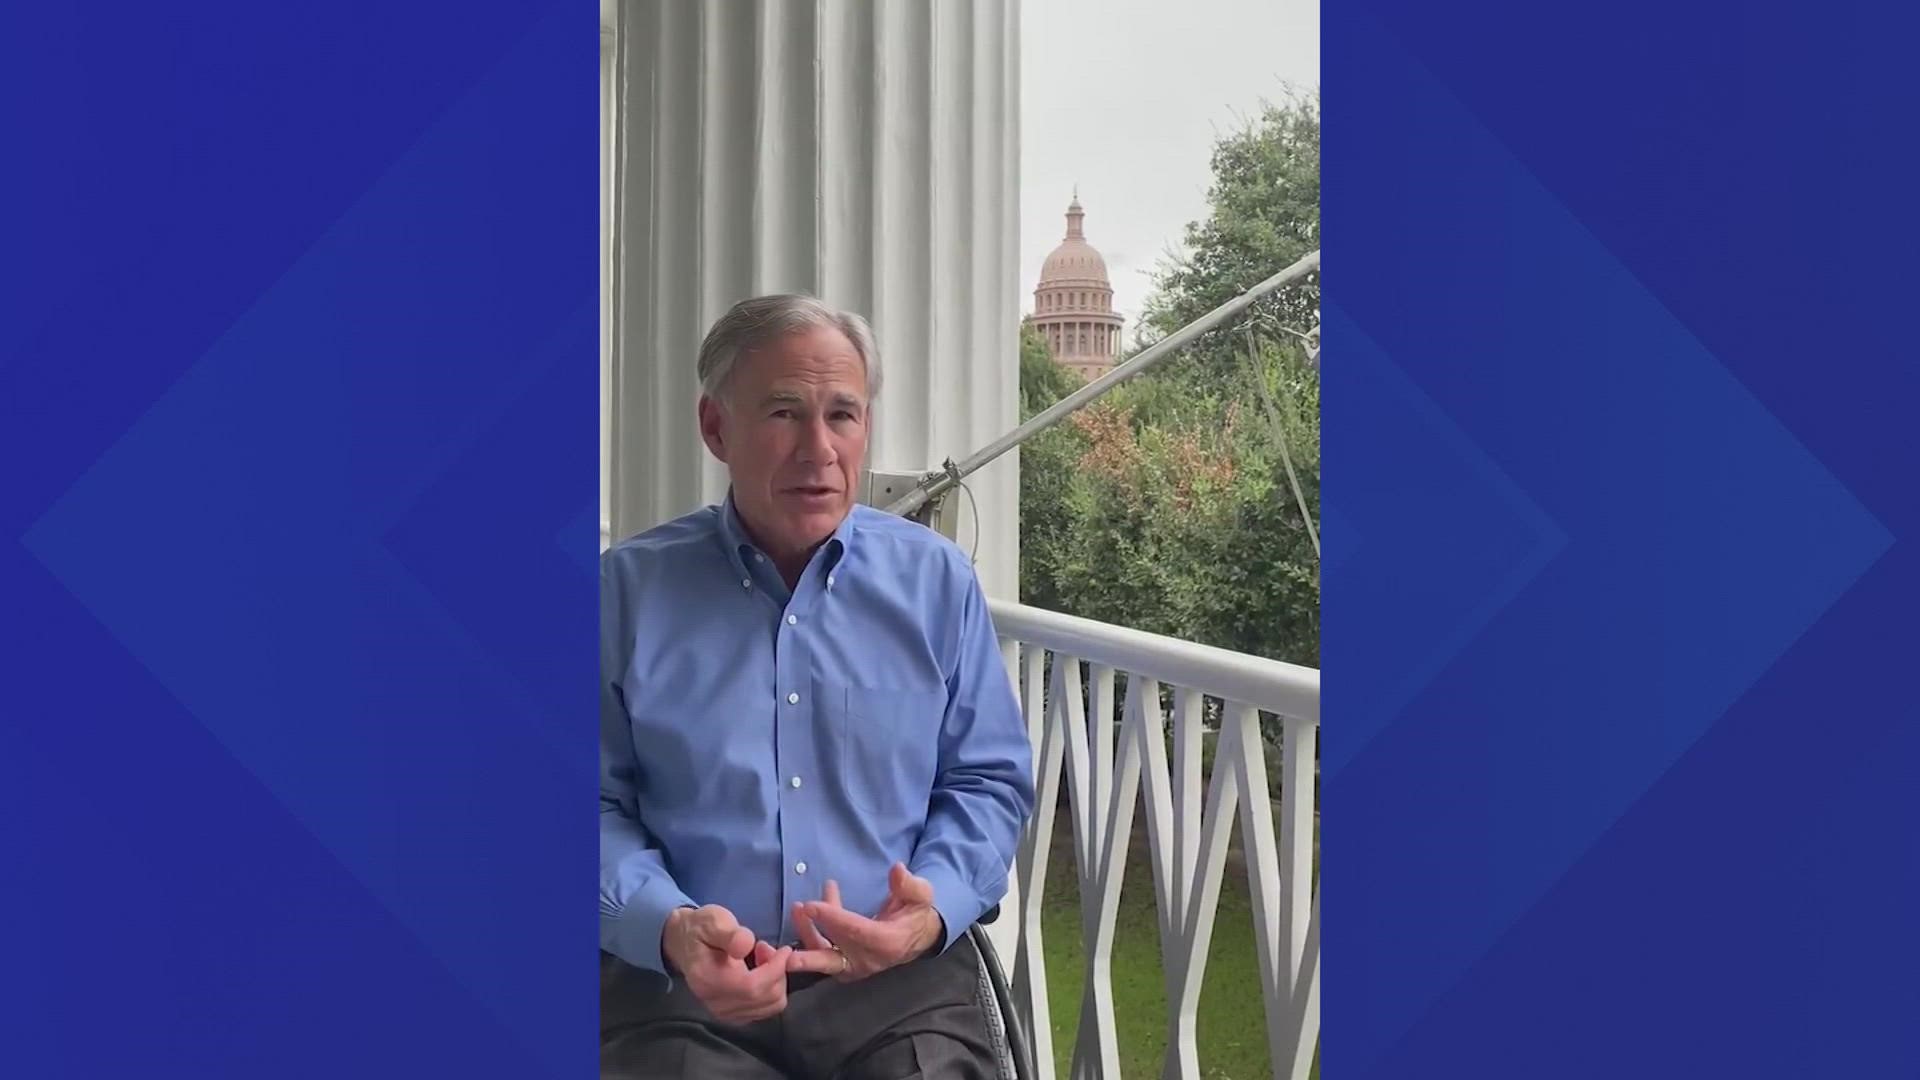 Gov. Abbott tested positive for COVID on Tuesday, according to his office. He is fully vaccinated and is experiencing no symptoms.